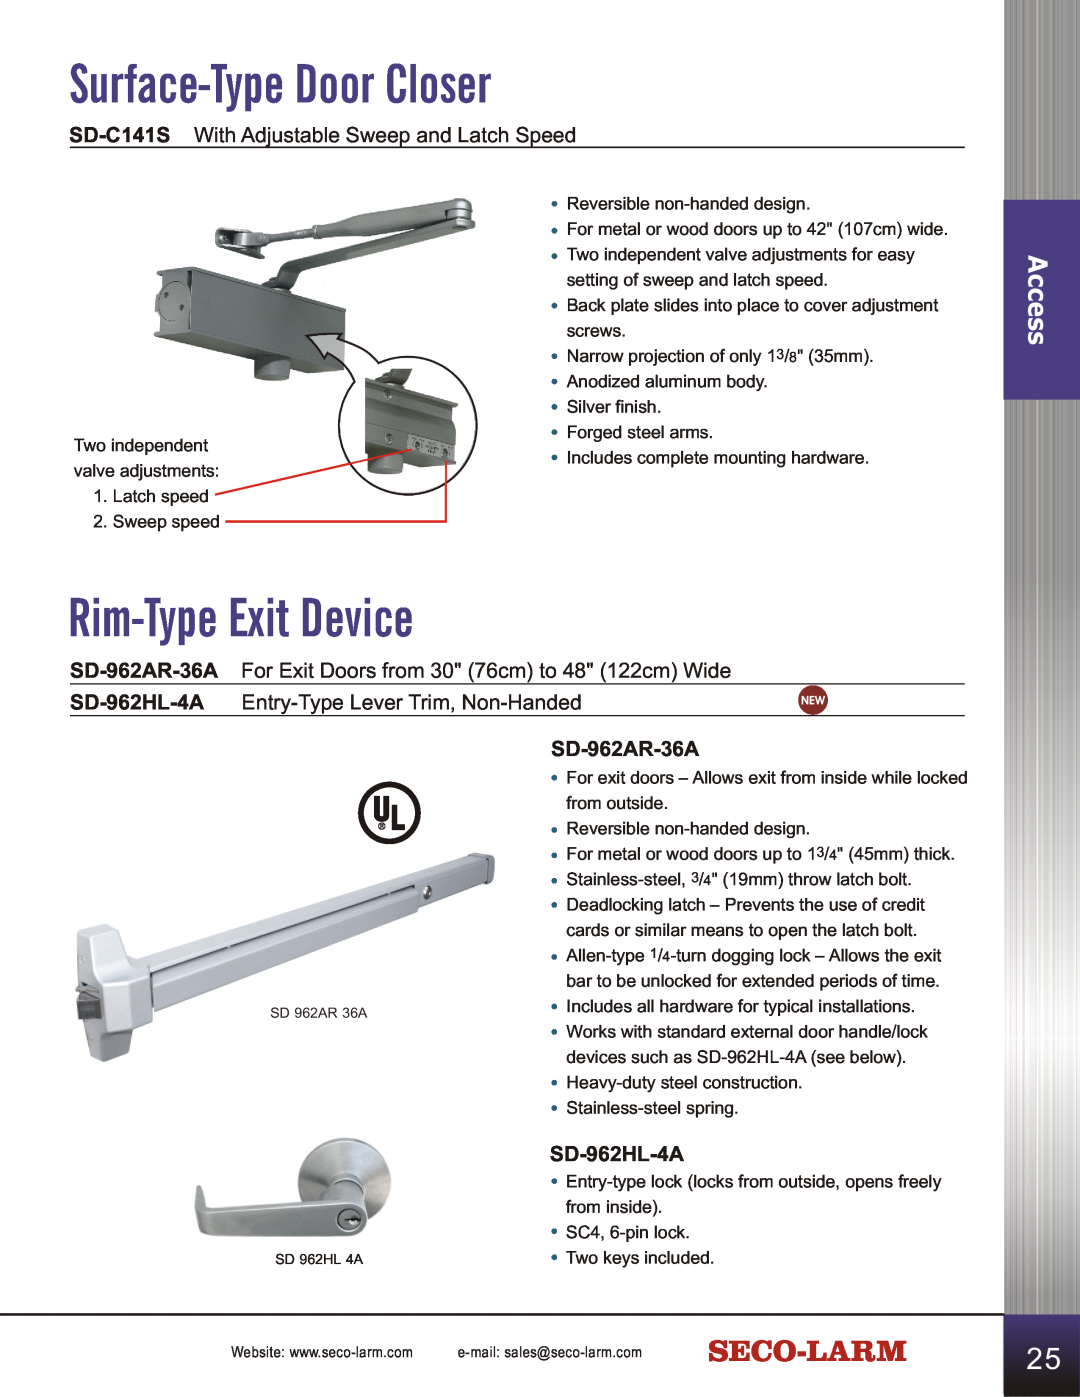 SECO-LARM USA SD-C141S manual Surface-TypeDoor Closer, Rim-TypeExit Device, Access, Entry-TypeLever Trim, Non-Handed 